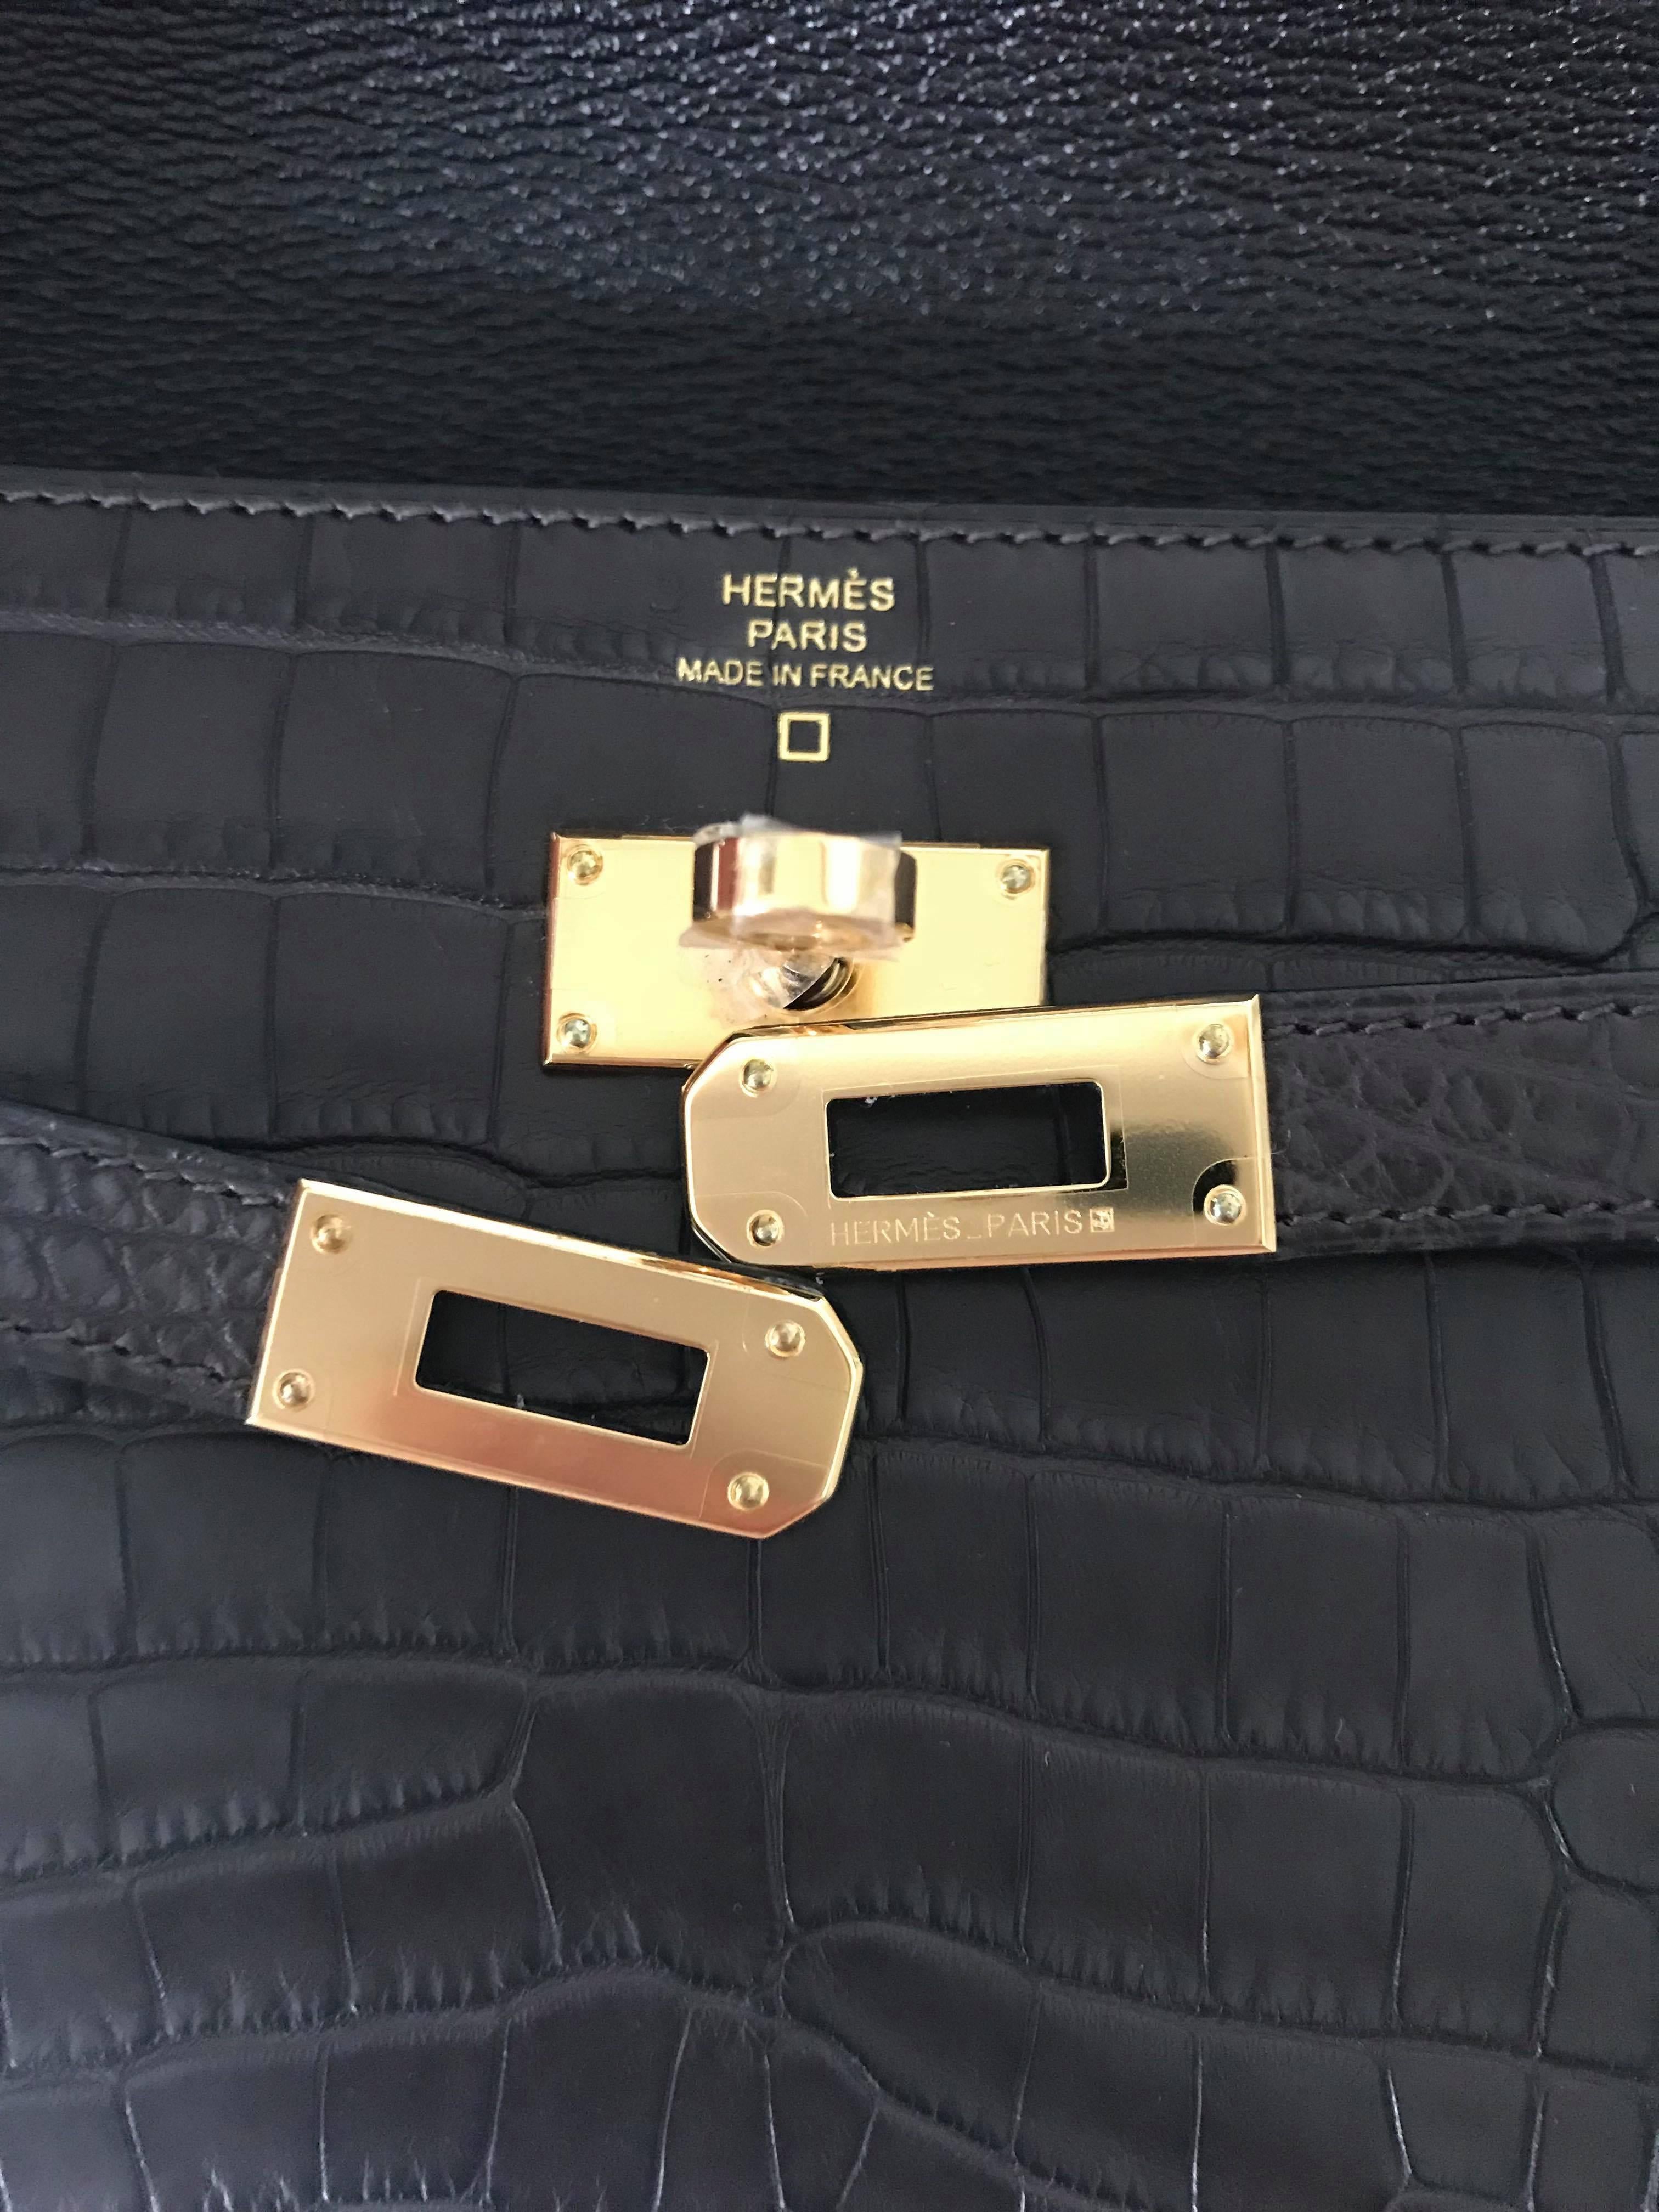 VERY RARE AND MAGNIFIC Hermès Paris Made In France
Kelly Classique Long Wallet
Alligator Mississipiens mat and and Leather 
Color : Ebene / Moka 
Size : 20 cm x 11 cm x 1.5 cm
Code date inside 
Plastic is still on Hardware gold plated
Please